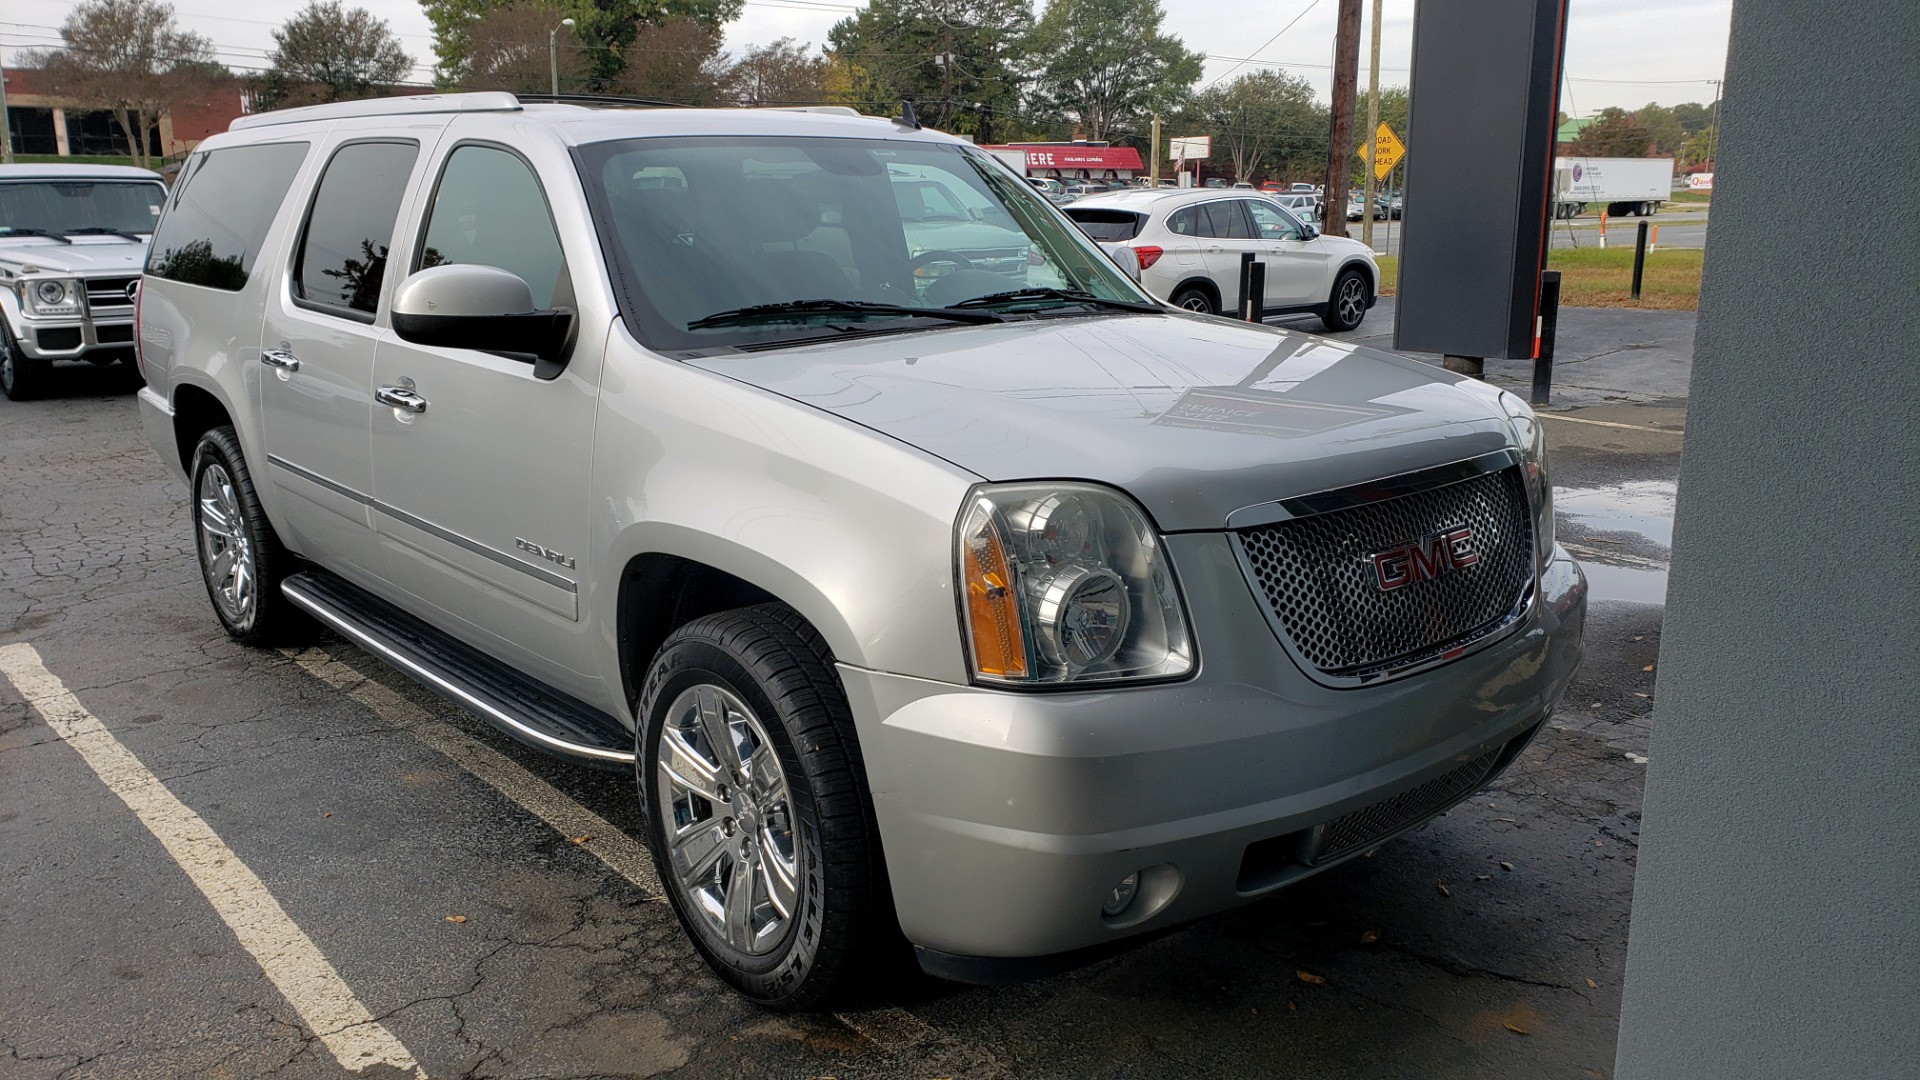 Used 2014 GMC YUKON XL DENALI / 5.3L V8 / AWD / NAV / BOSE / SUNROOF / 3-ROW / REARVIEW for sale Sold at Formula Imports in Charlotte NC 28227 6